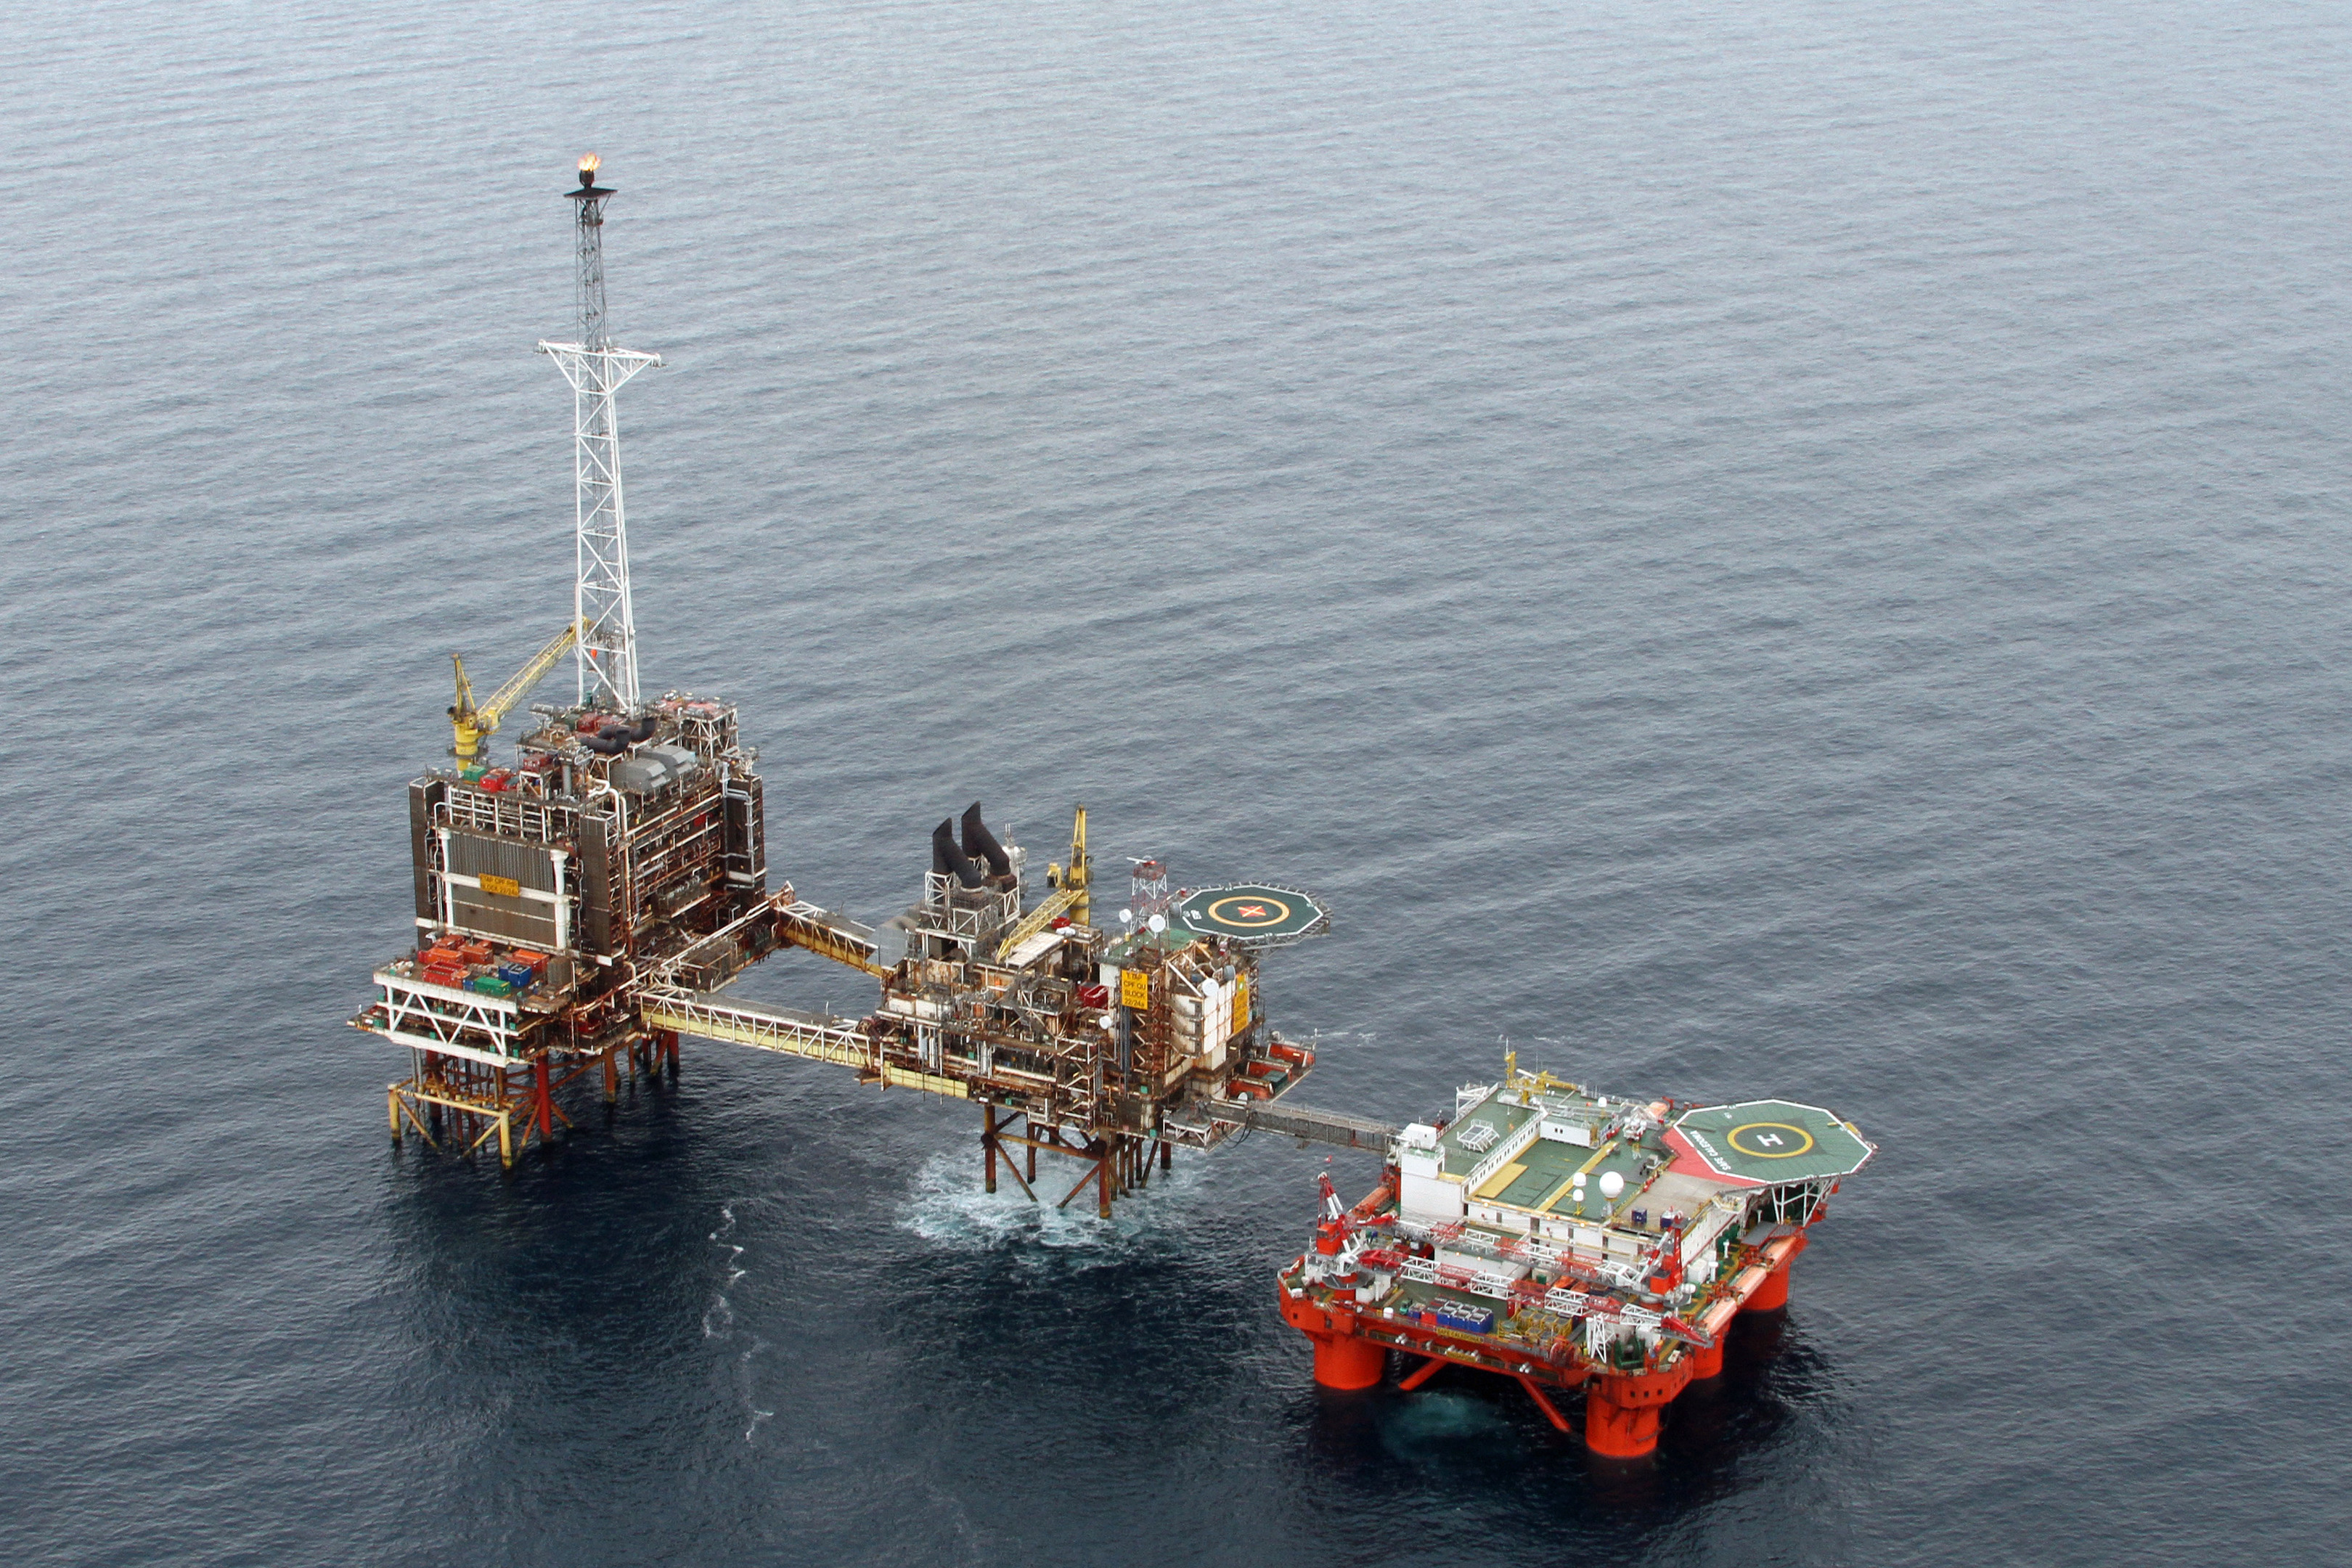 The Safe Caledonia (right) pictured with BP's ETAP platform